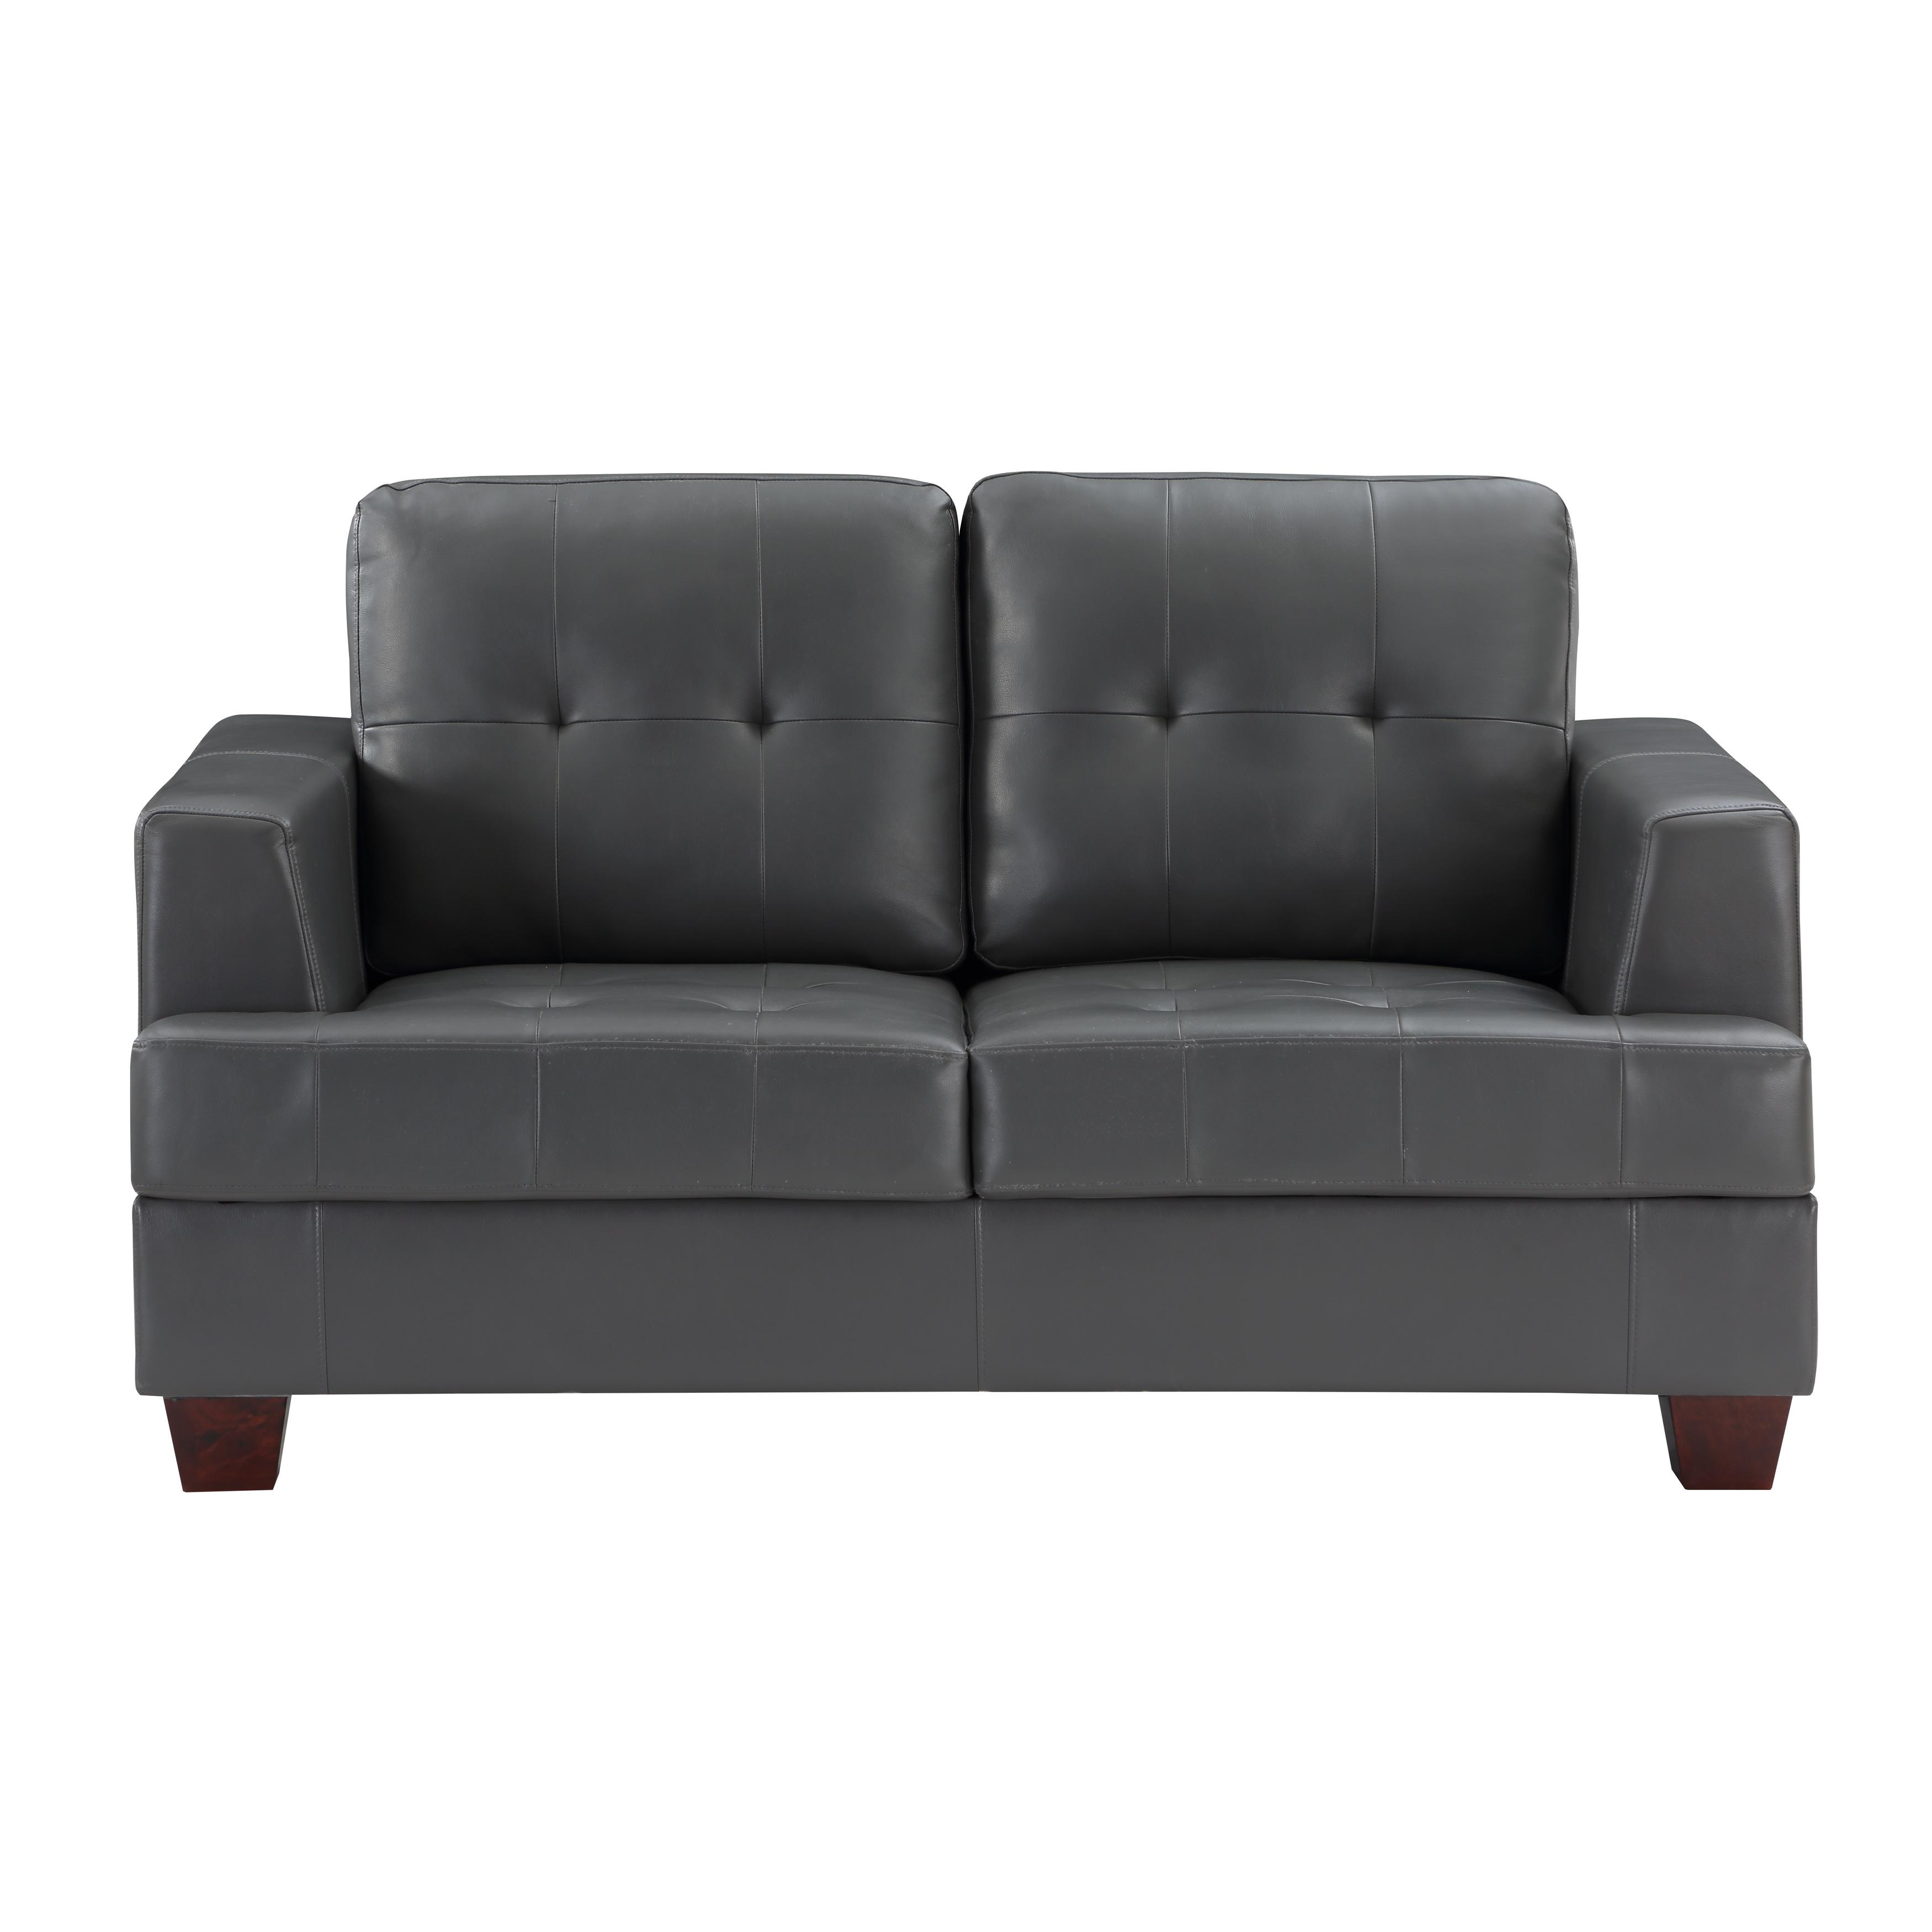 Modern Loveseat 9309GY-2 Hinsall 9309GY-2 in Gray Faux Leather